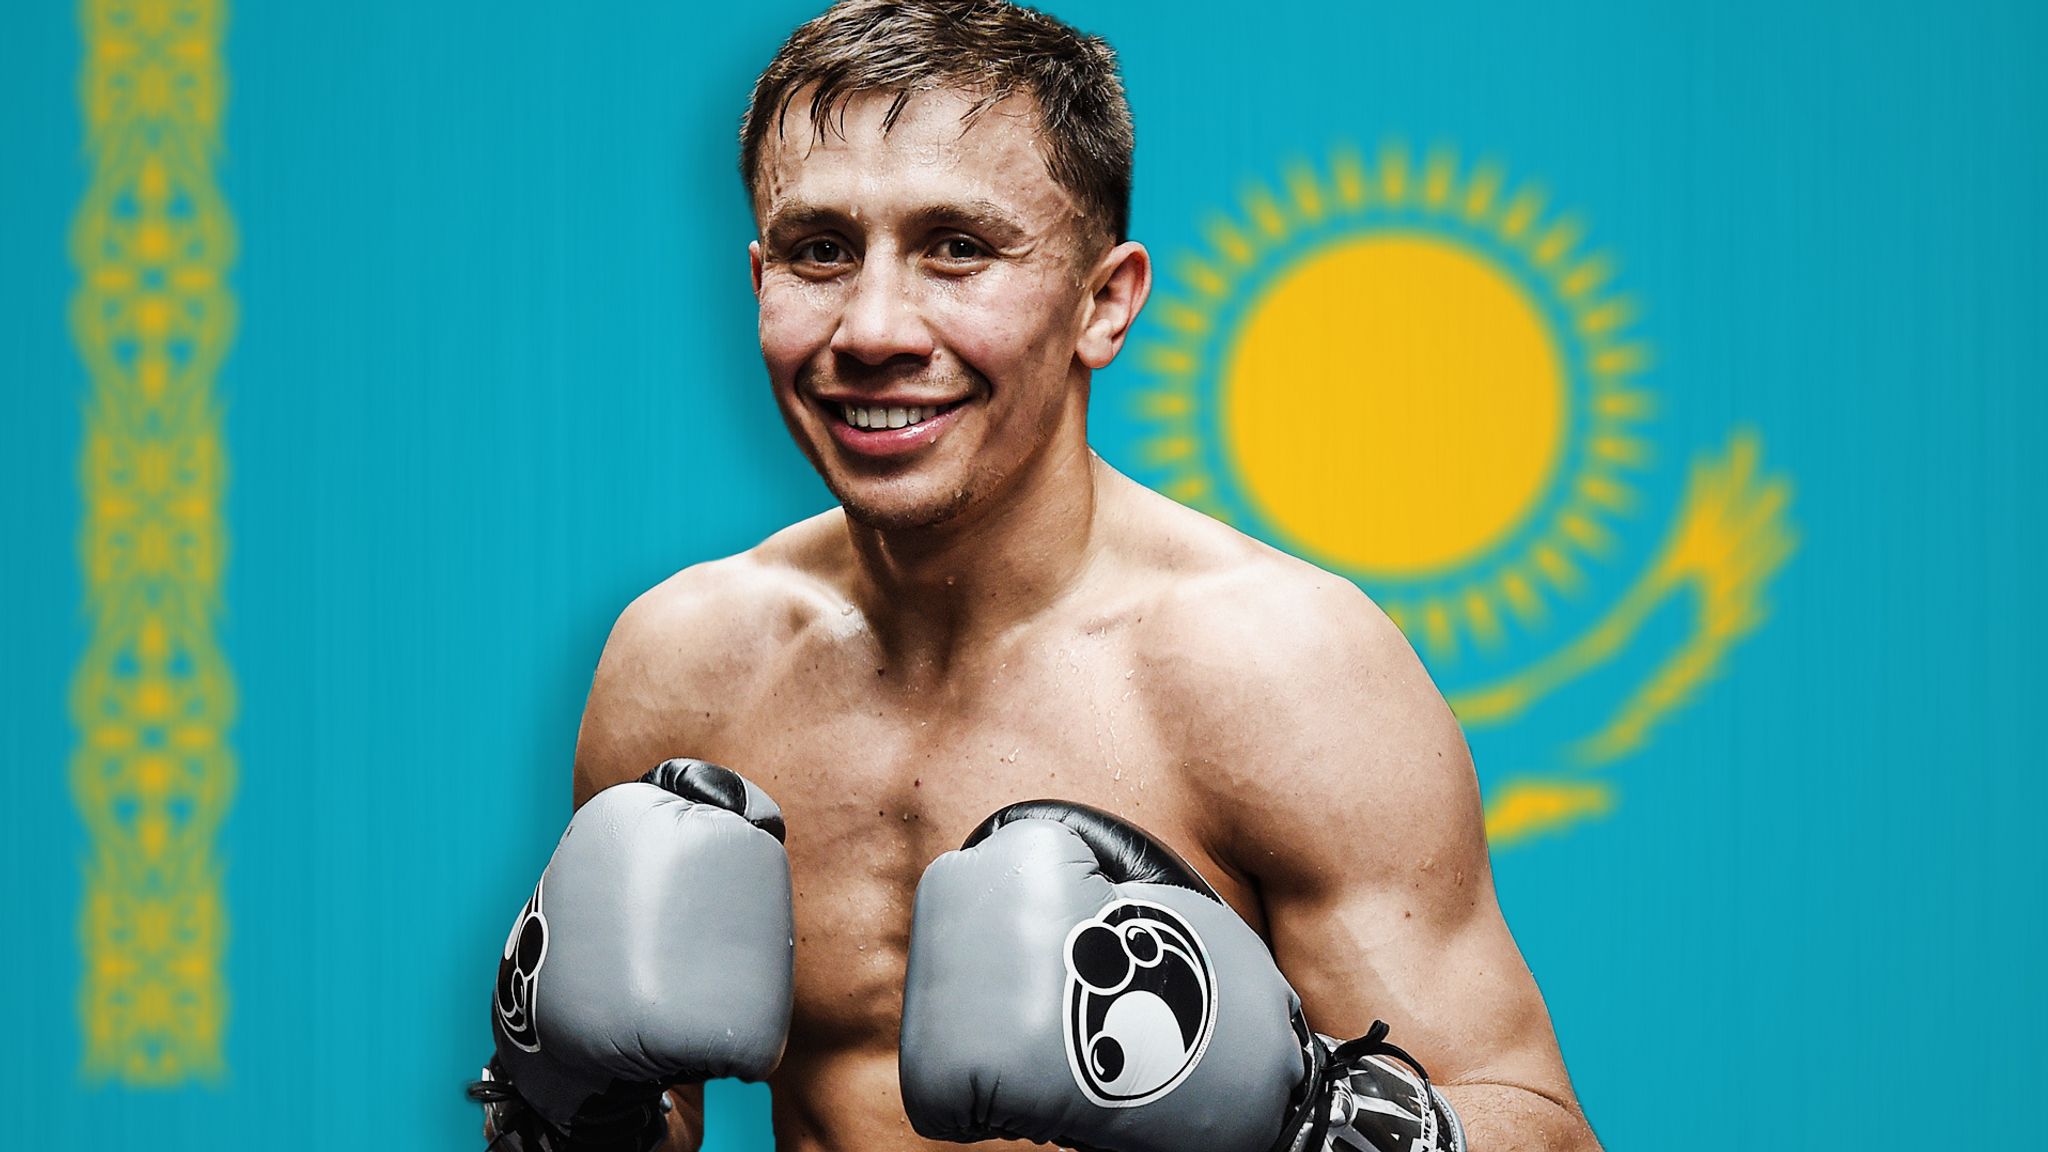 Gennadiy Golovkin puts his title on the line against Murata in Saturday unification